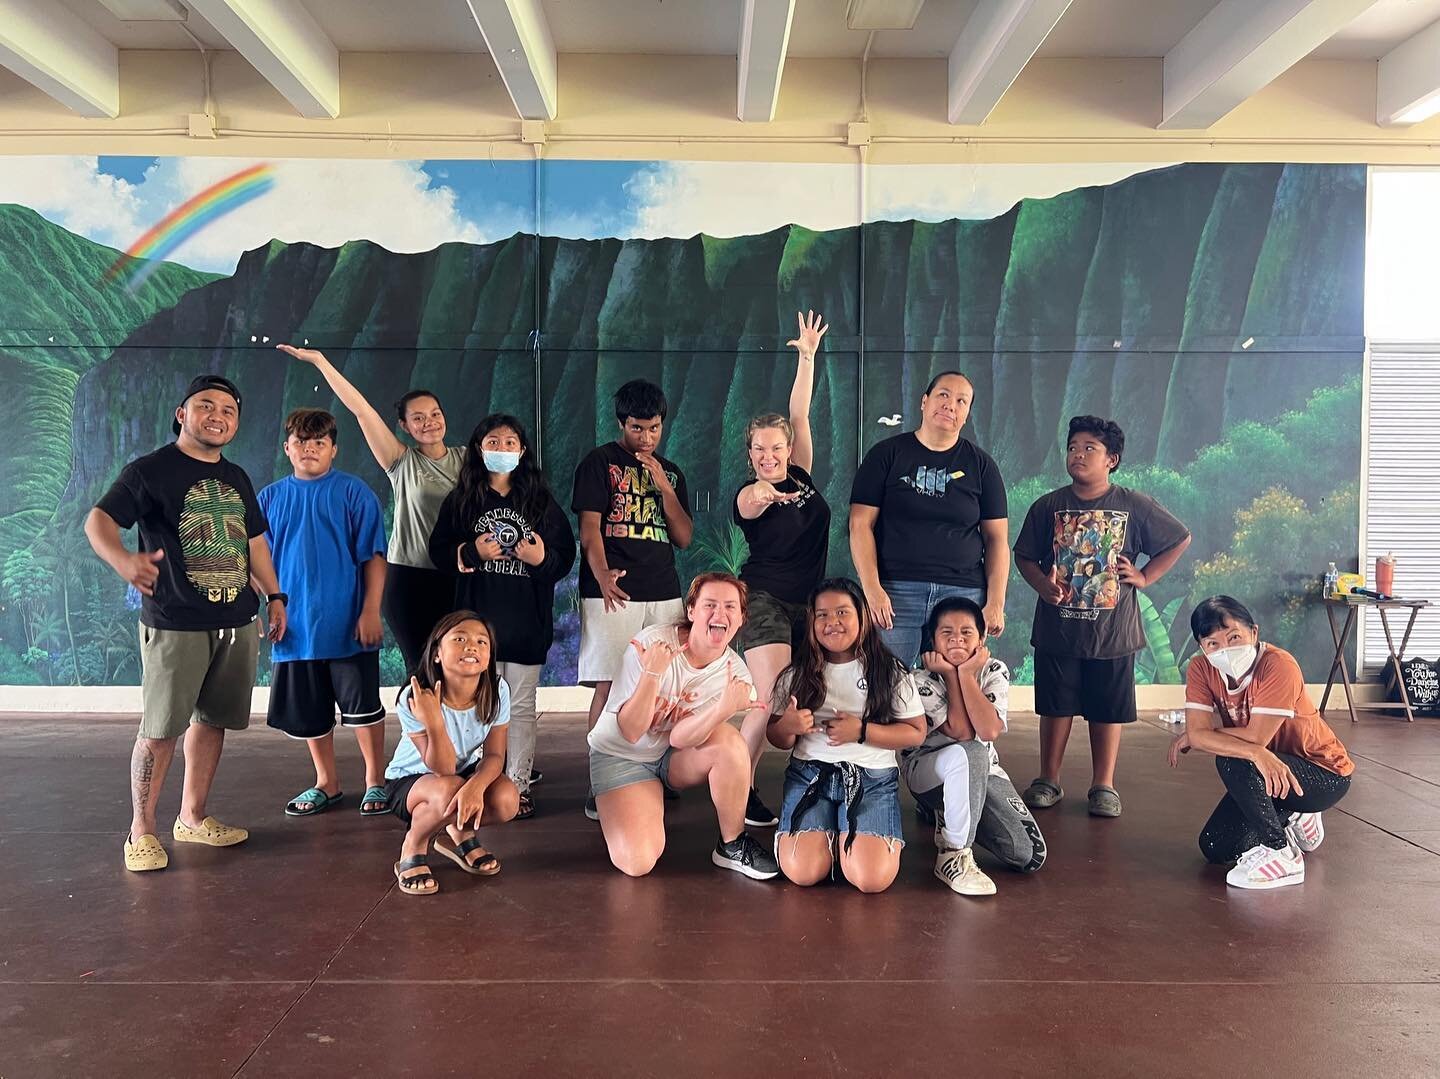 Reflecting on our incredible week of dance classes at Kuhio Park Terrace in Honolulu Hawaii with @pacthawaii and @hawaiipublictheater !! We spent the week with these youth on their fall break from school teaching them discipline and structure through